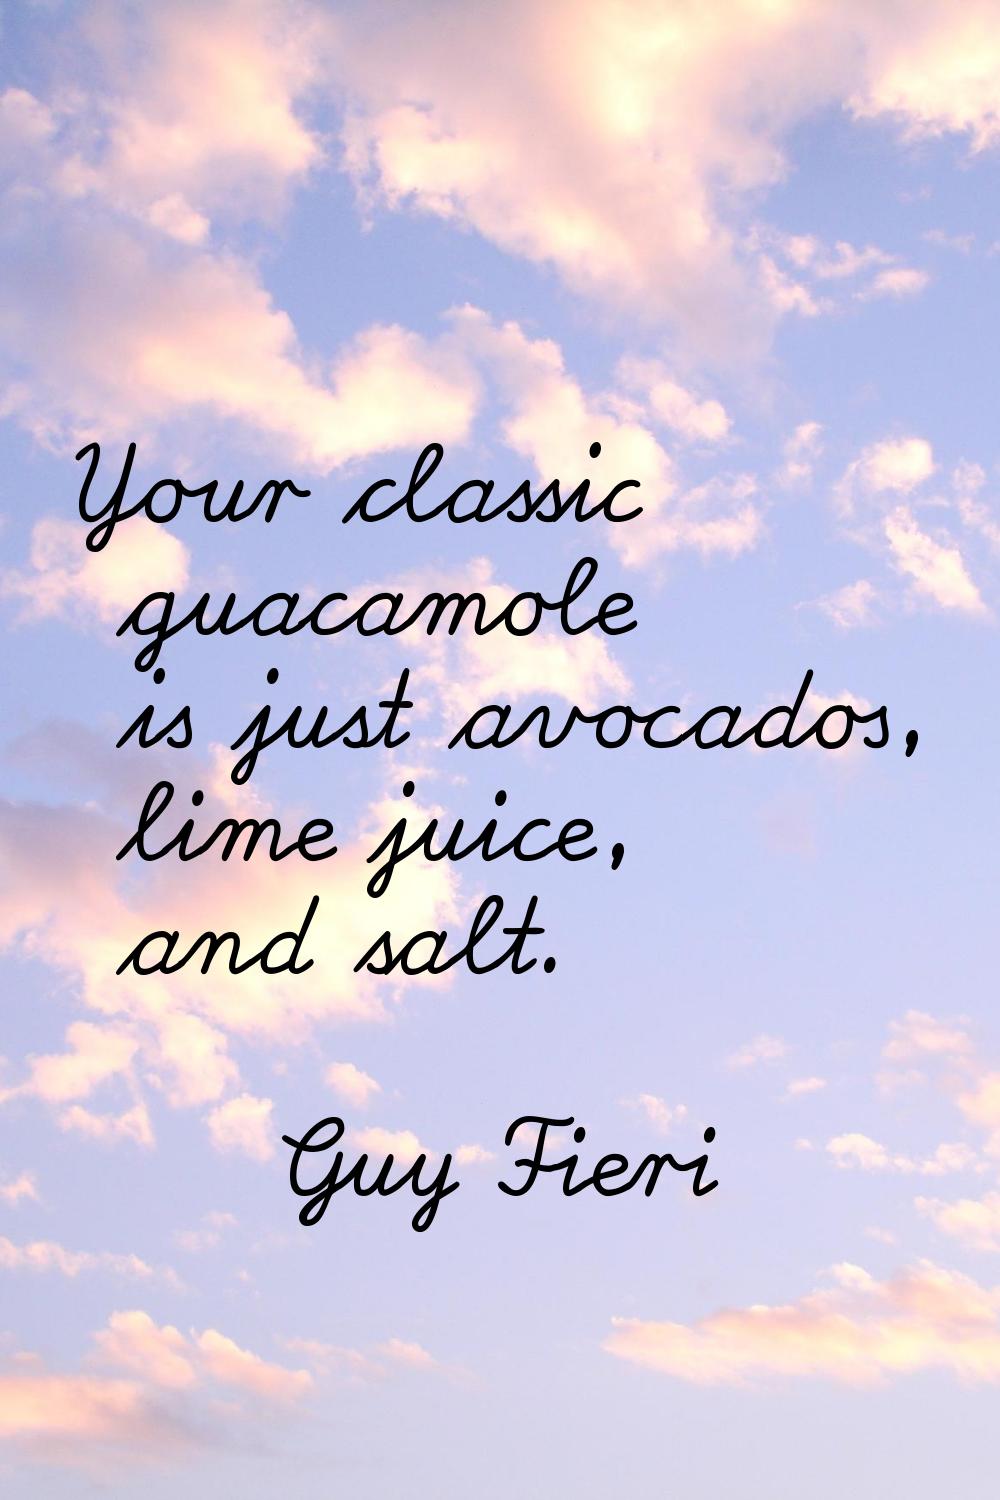 Your classic guacamole is just avocados, lime juice, and salt.